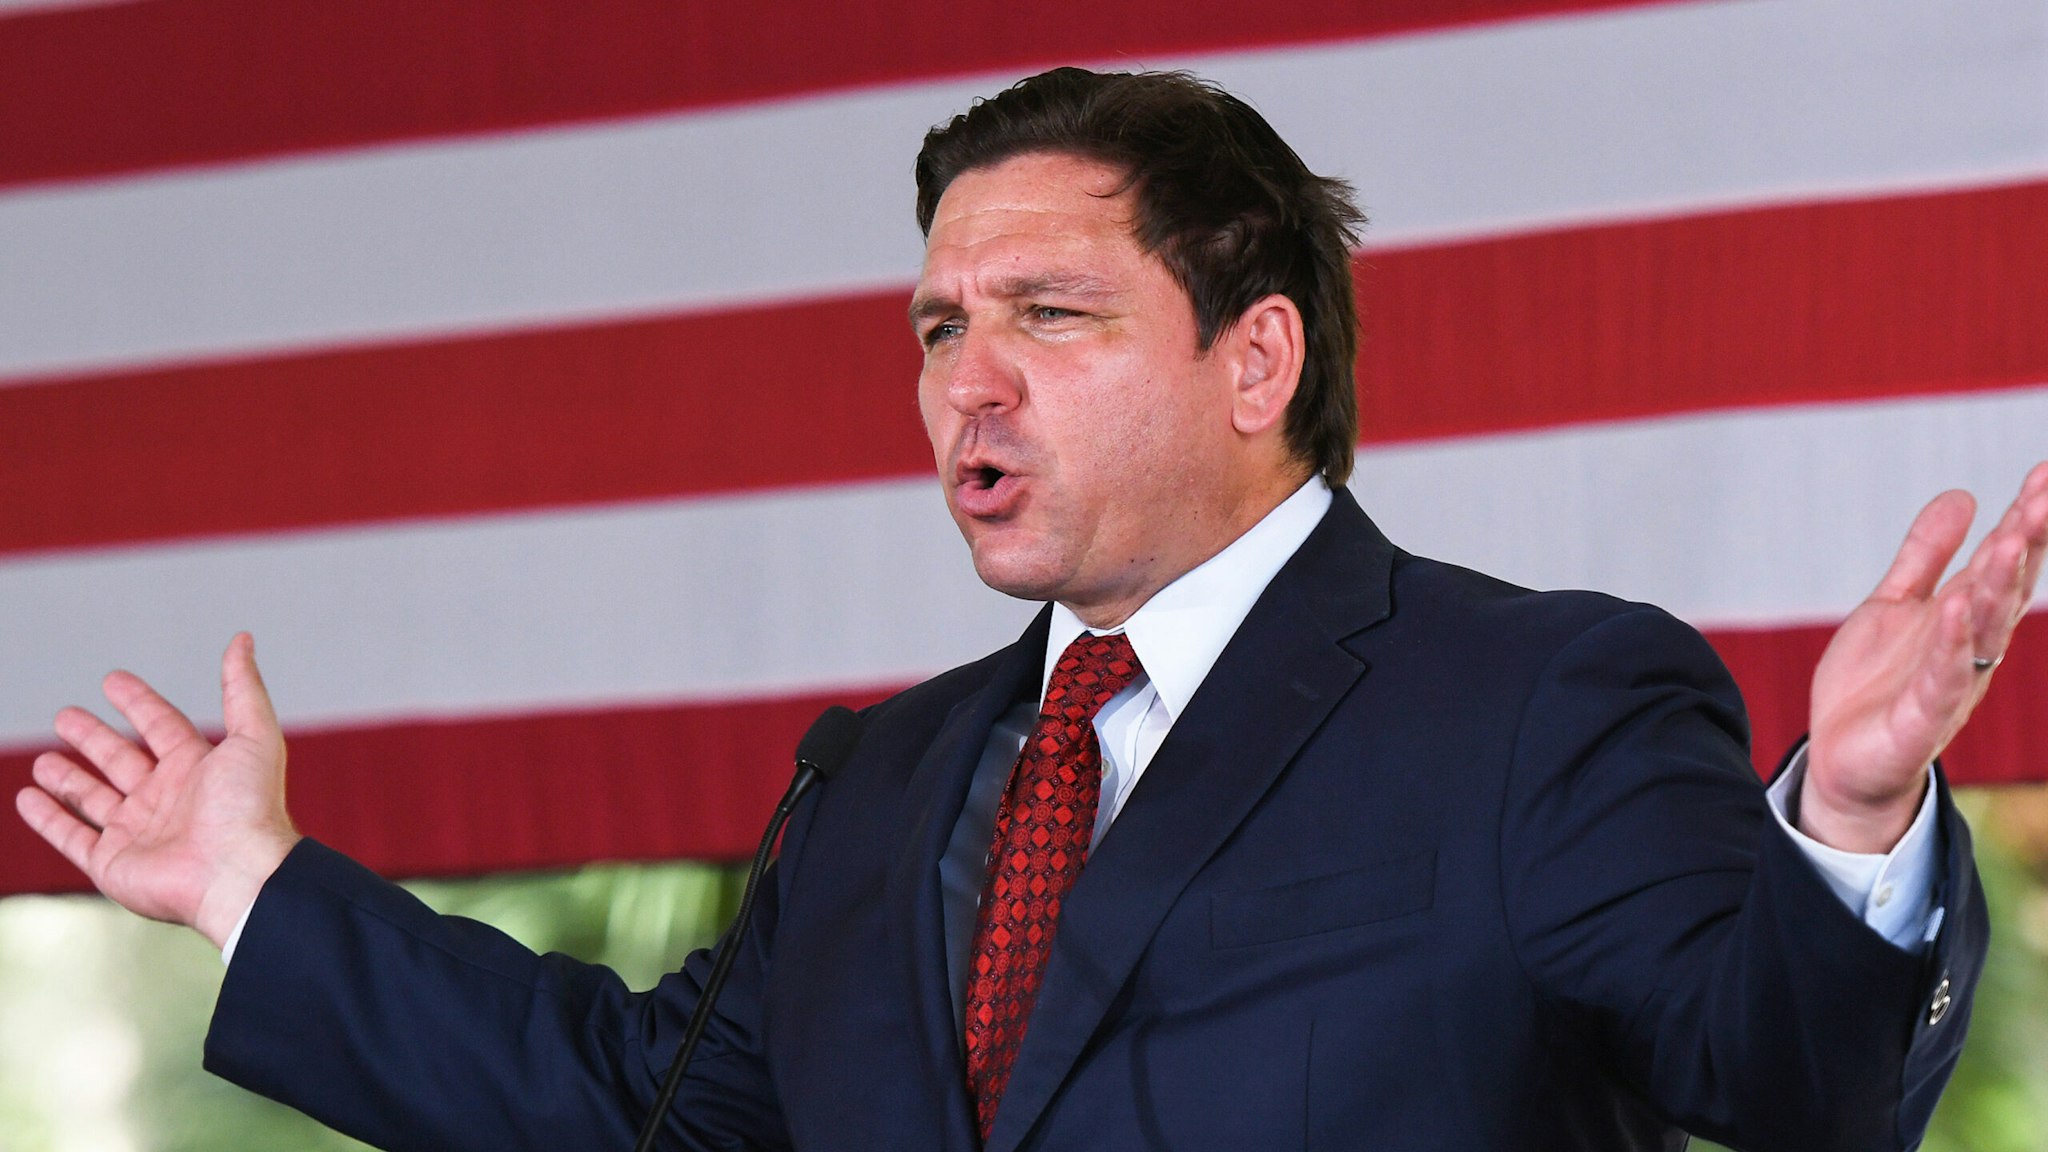 Florida Gov. Ron DeSantis speaks to supporters at a campaign stop on the Keep Florida Free Tour at the Horsepower Ranch in Geneva. DeSantis faces former Florida Gov. Charlie Crist for the general election for Florida Governor in November.